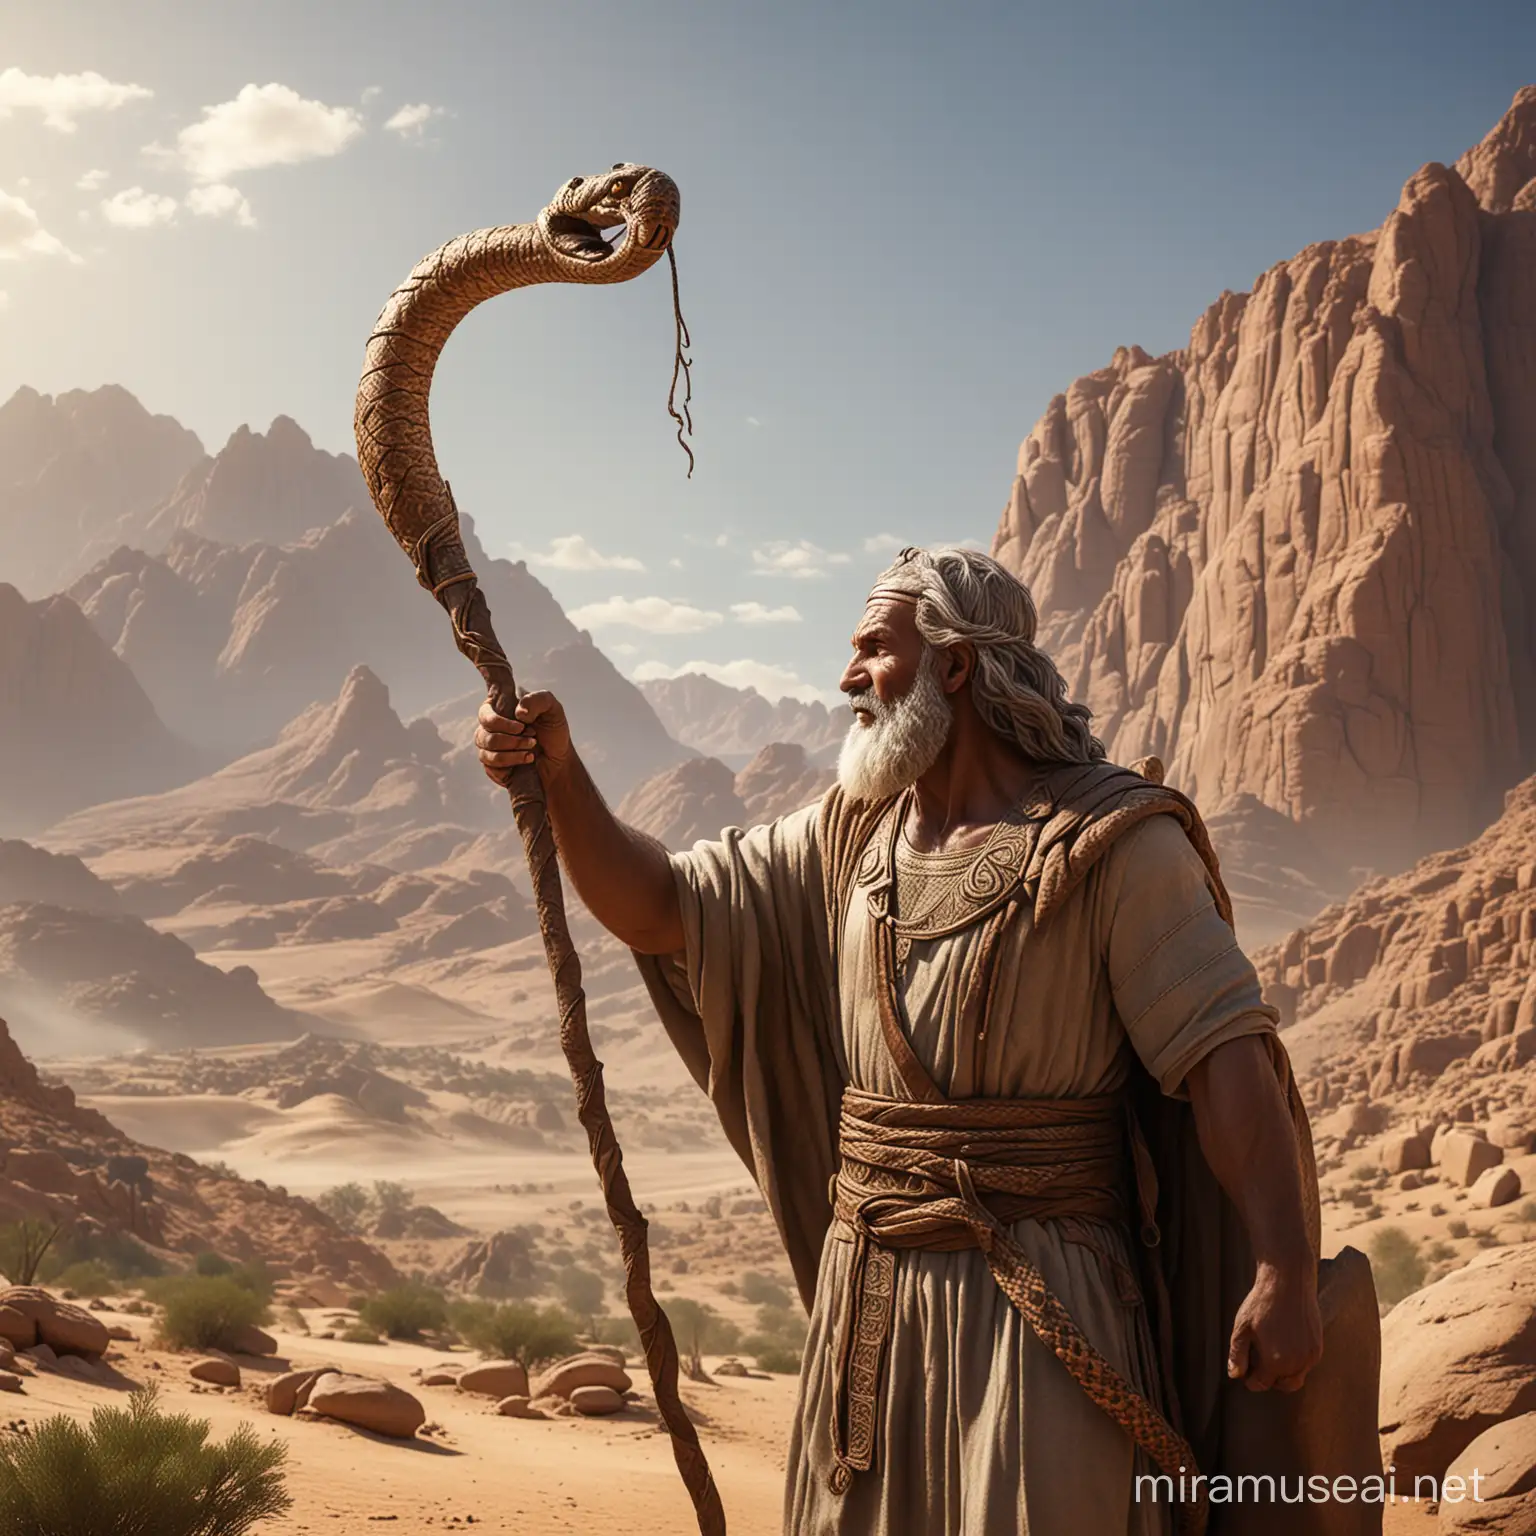 photo realistic, moses in sinai wilderness, lifting up a bronze staff shaped with bronze snake head, hyper realistic image, canon e0s r6 quality, Ultra High Quality, Ultra HD, 8K, Vivid Brushstrokes